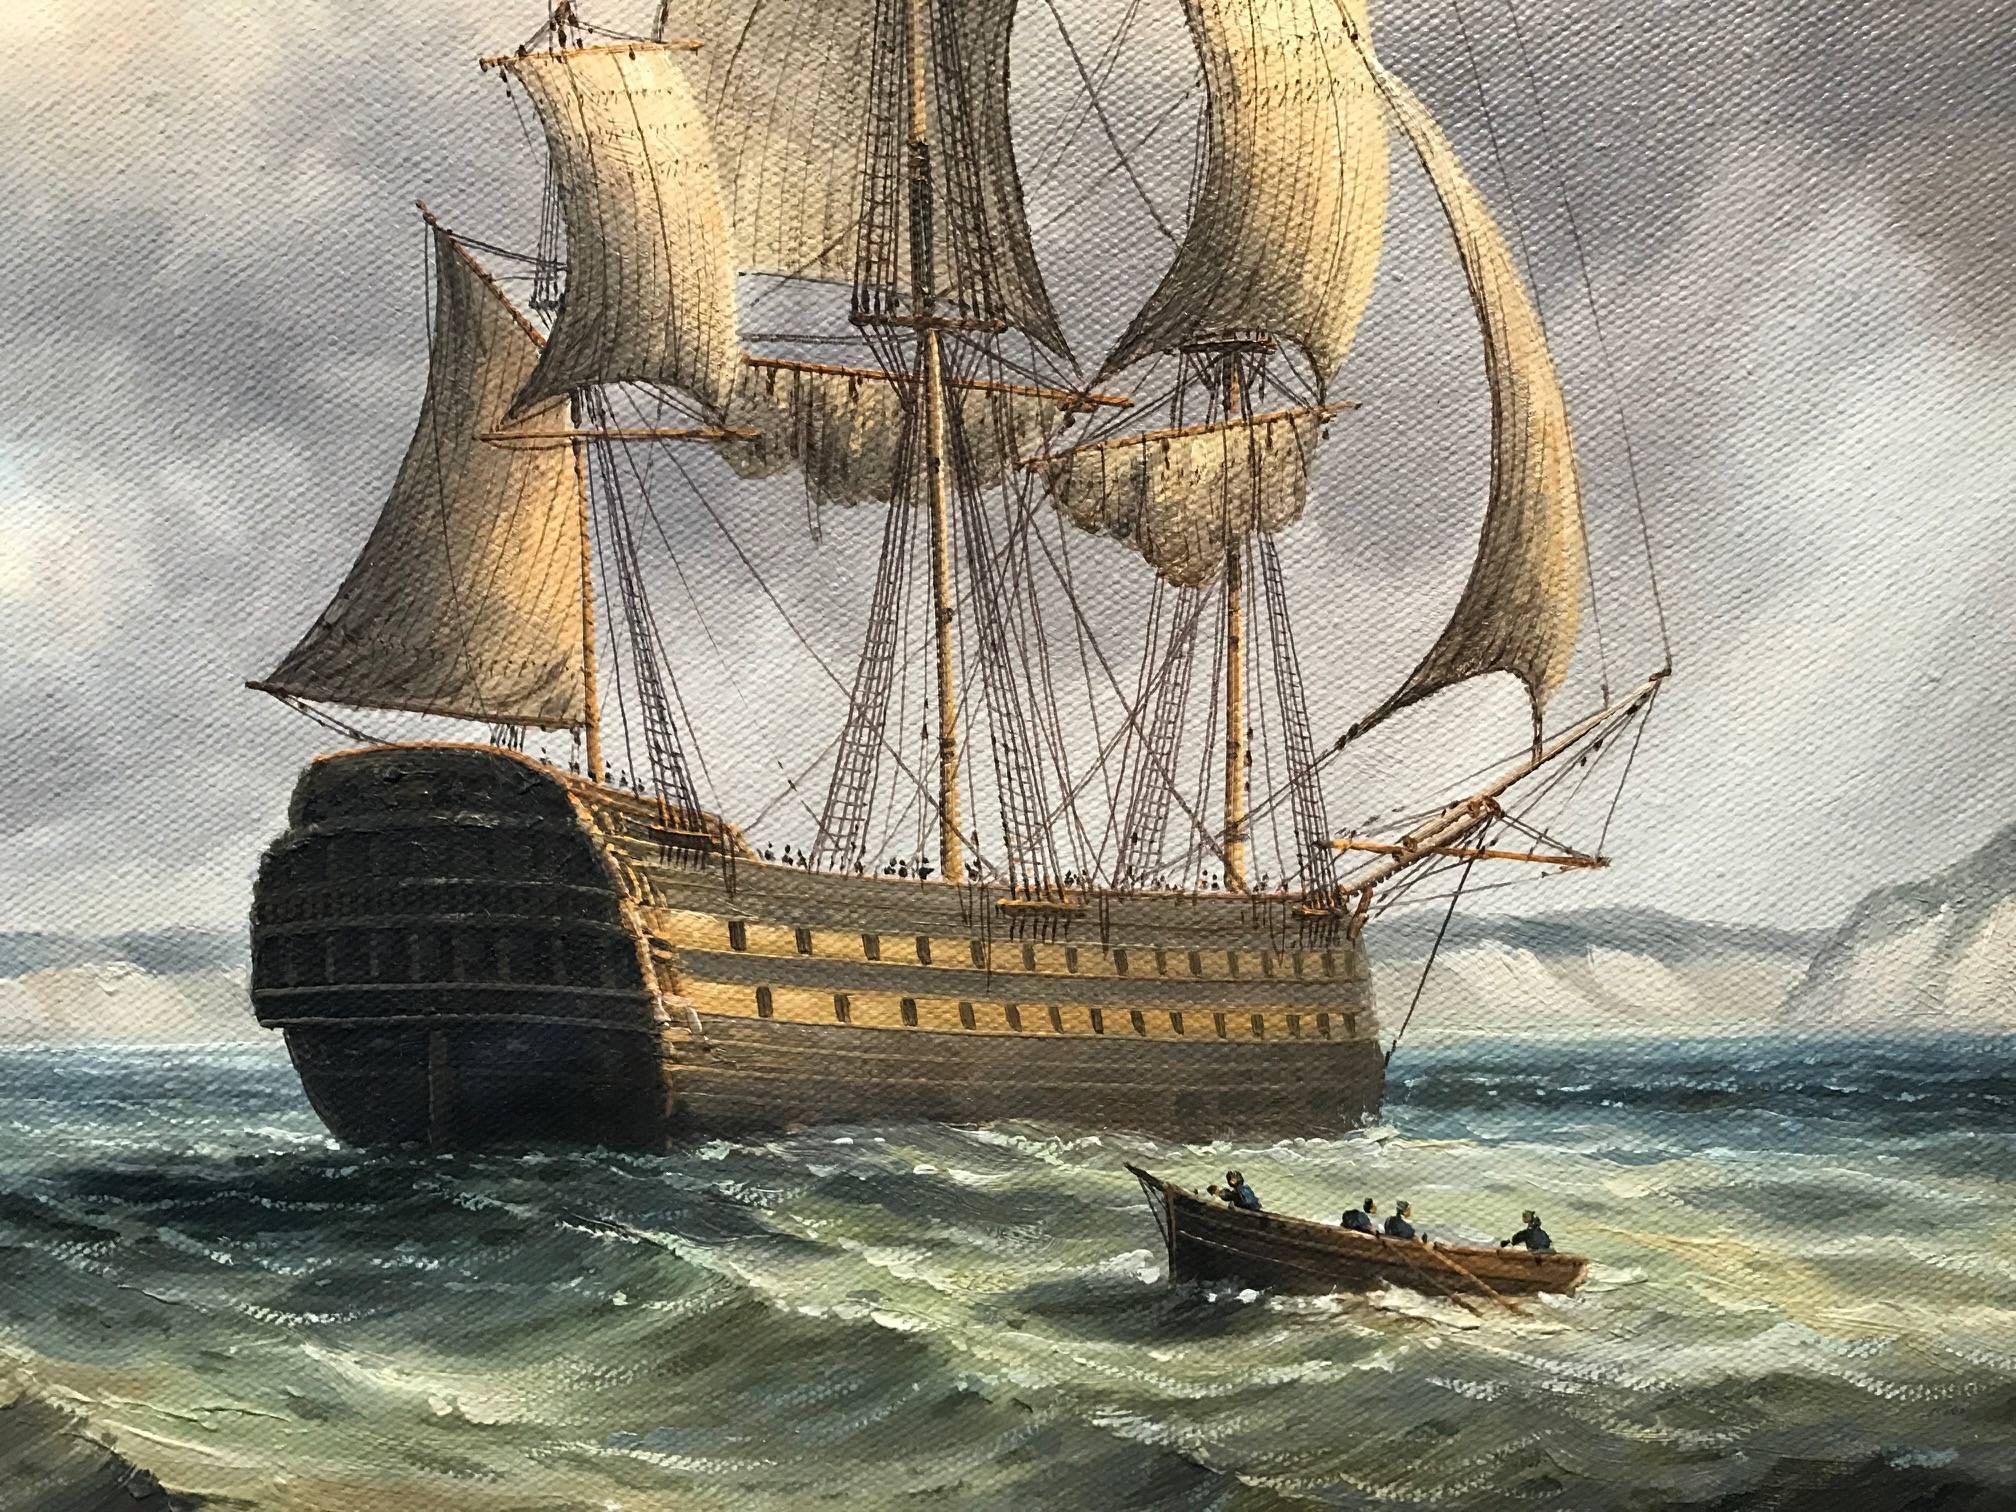 Napoleonic Warship in Seas off Coastline - Fine Oil Painting - Brown Landscape Painting by James Hardy